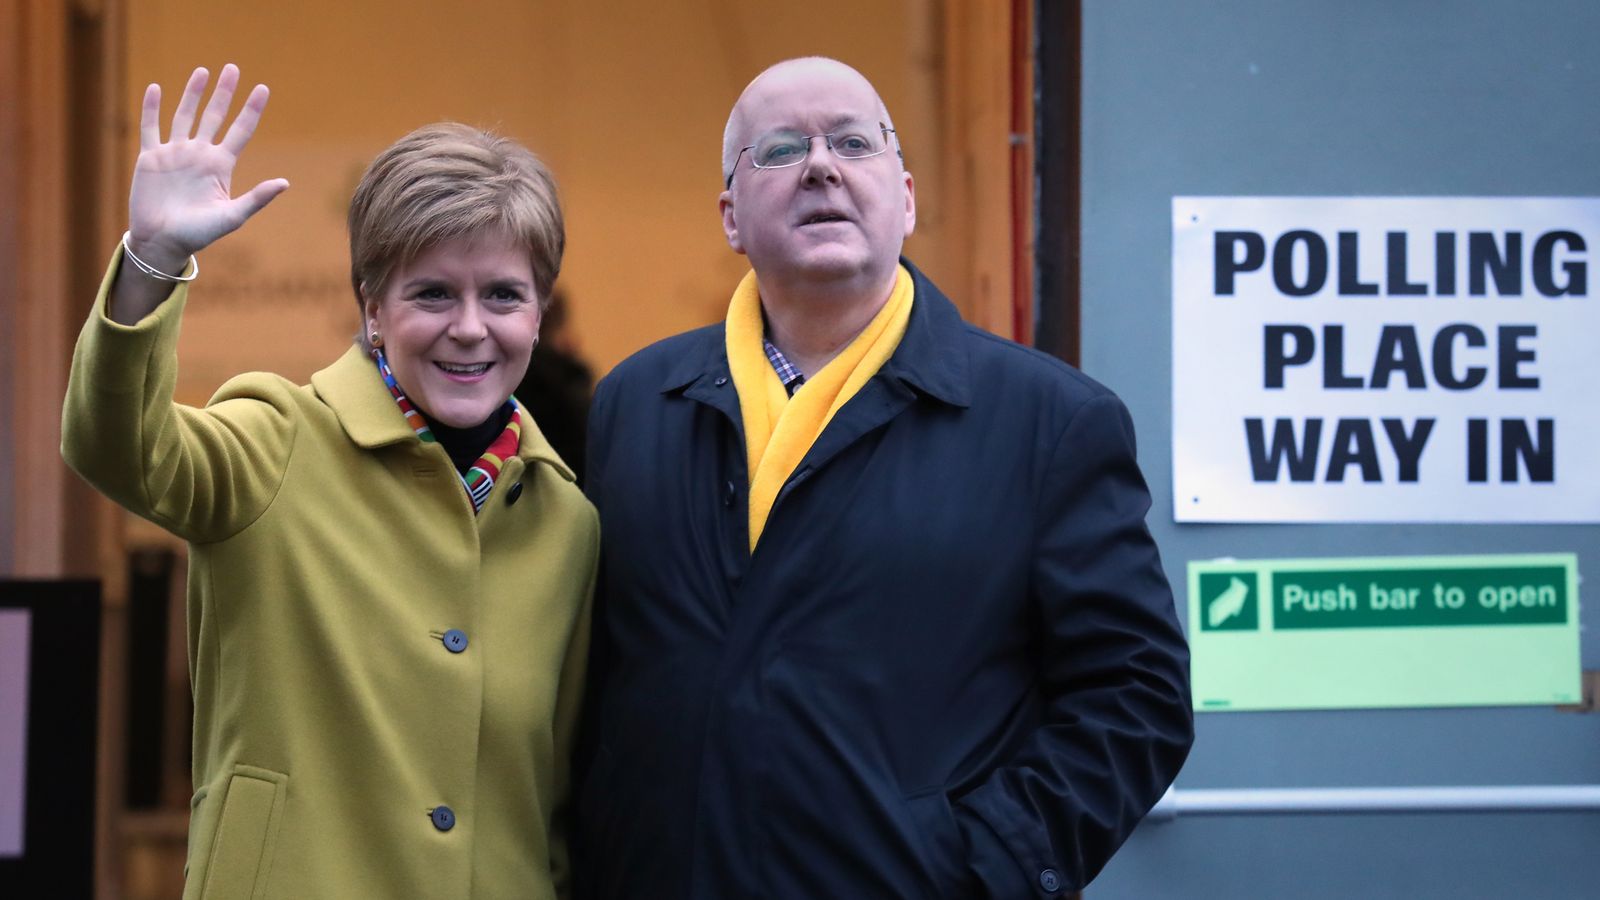 Nicola Sturgeon’s husband Peter Murrell quits as SNP chief executive in face of no confidence threat